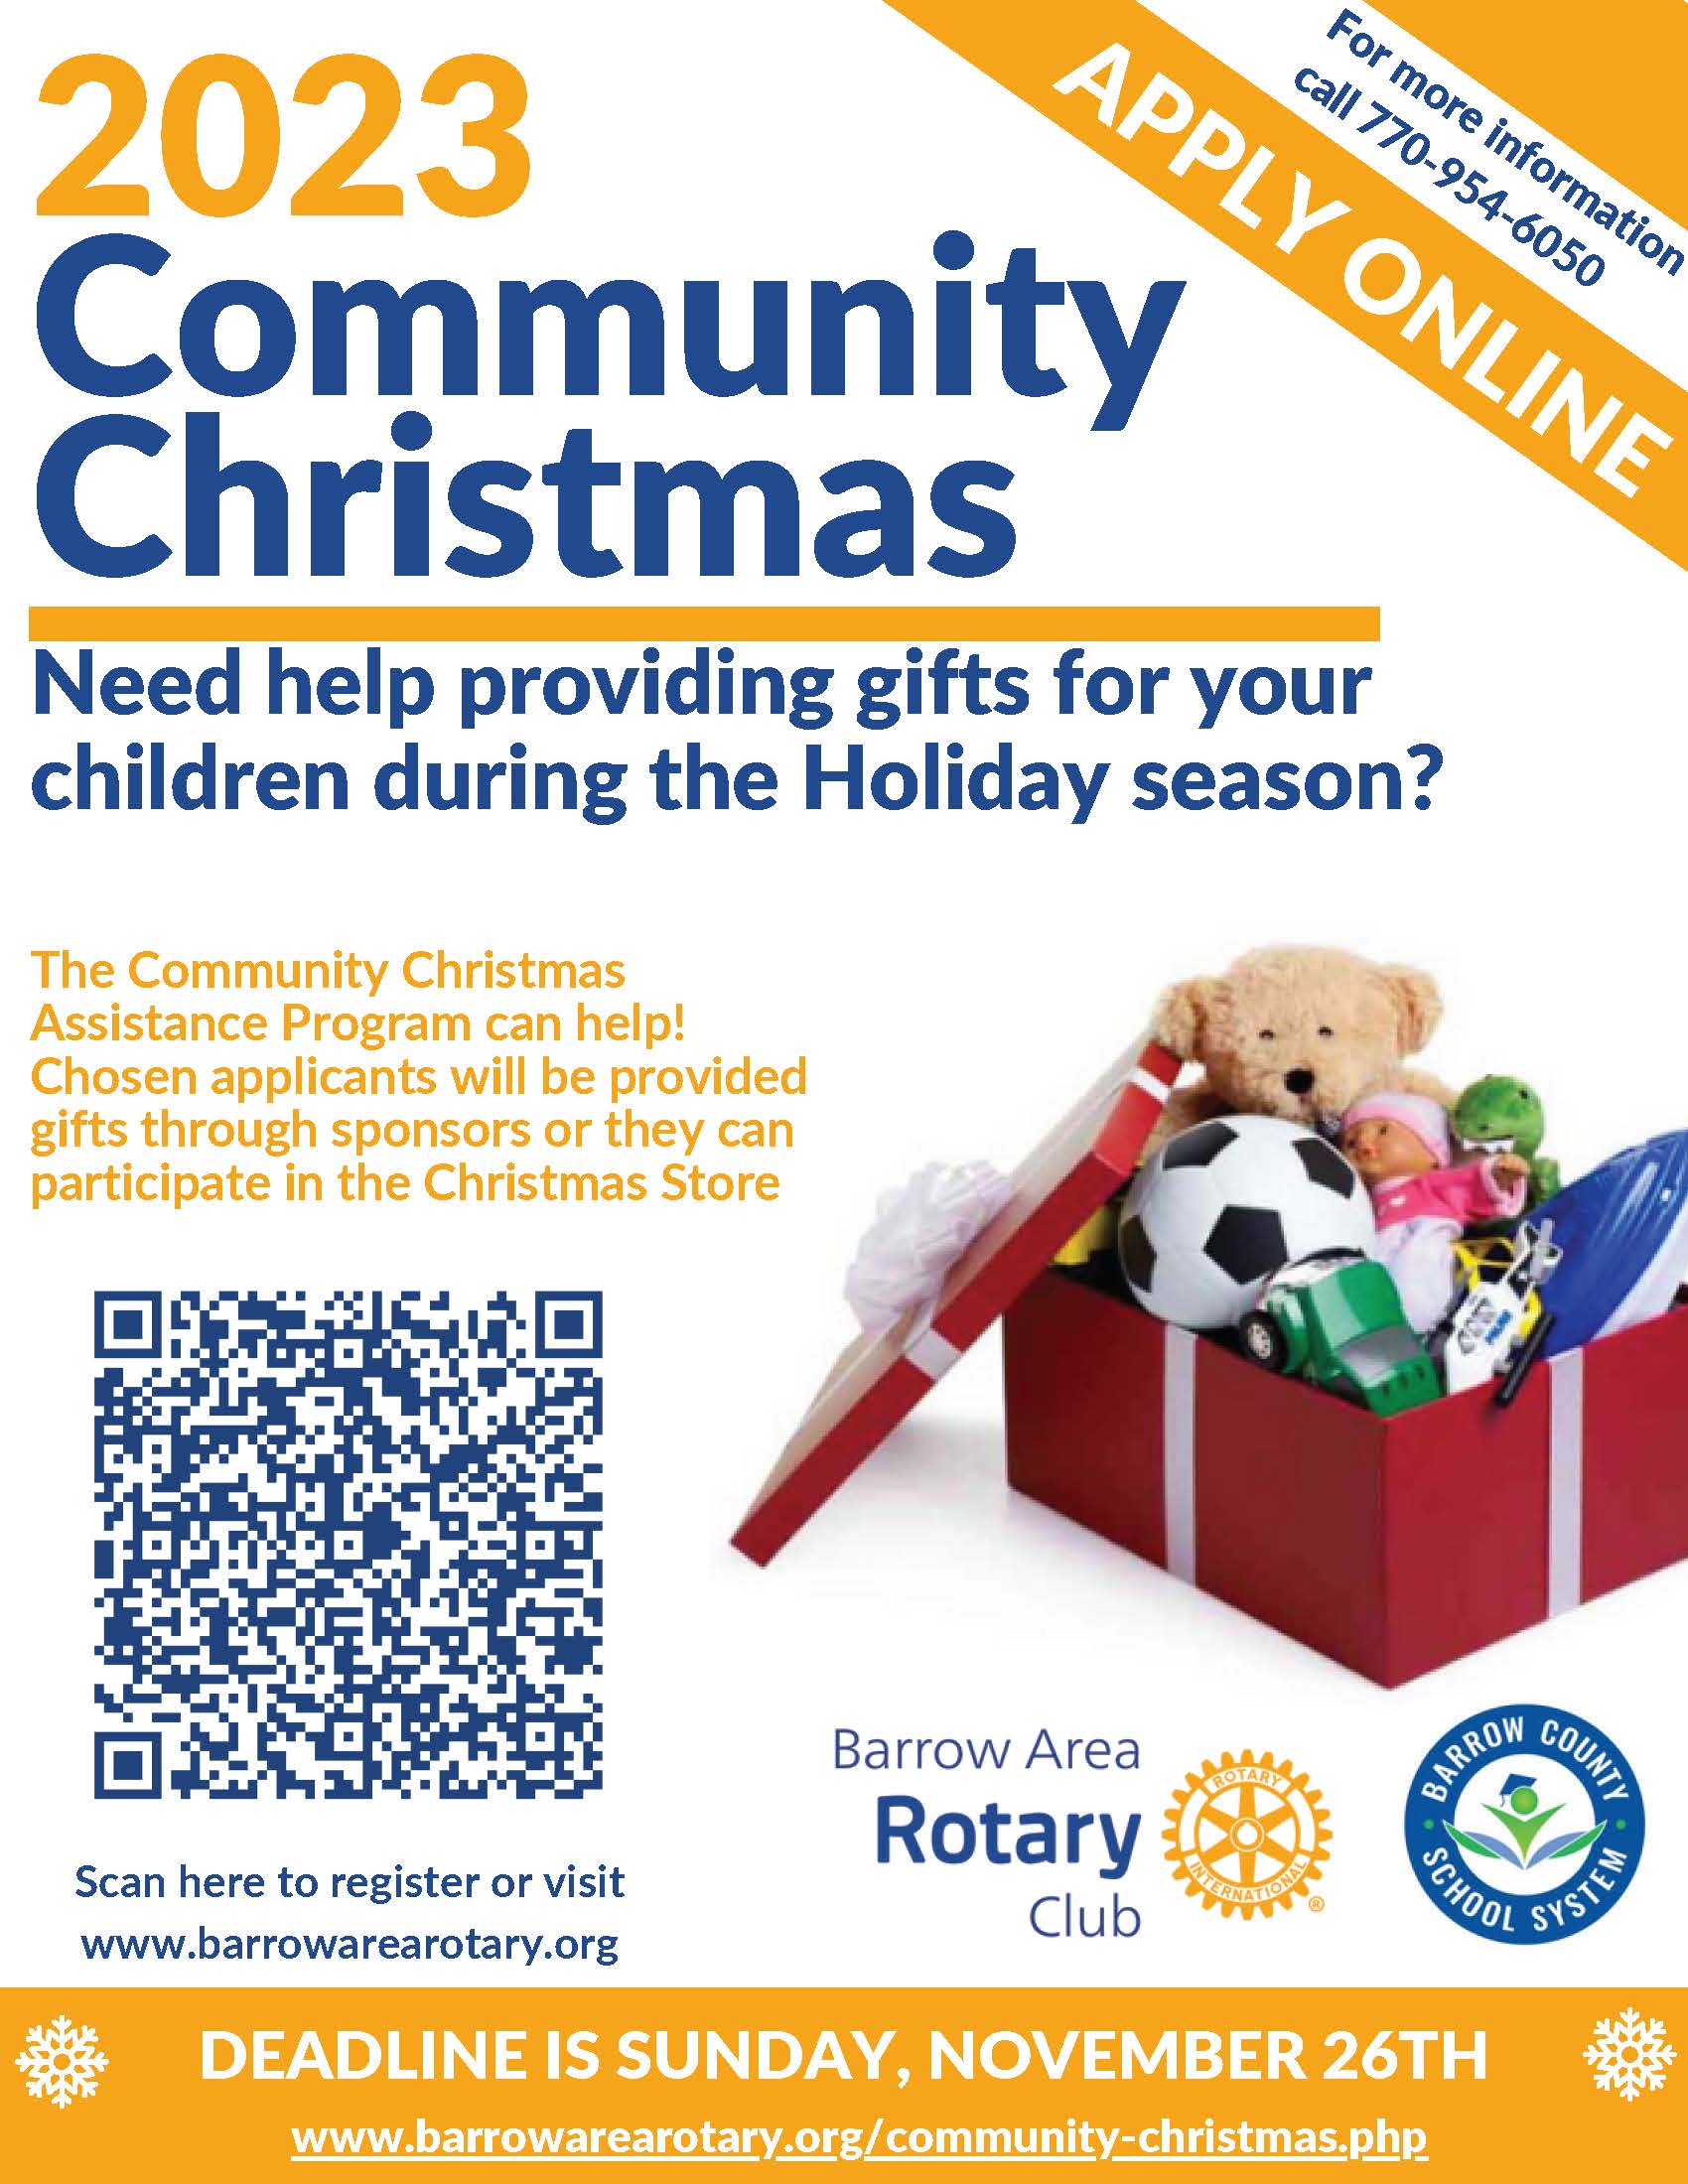 Community Christmas information - click for more 